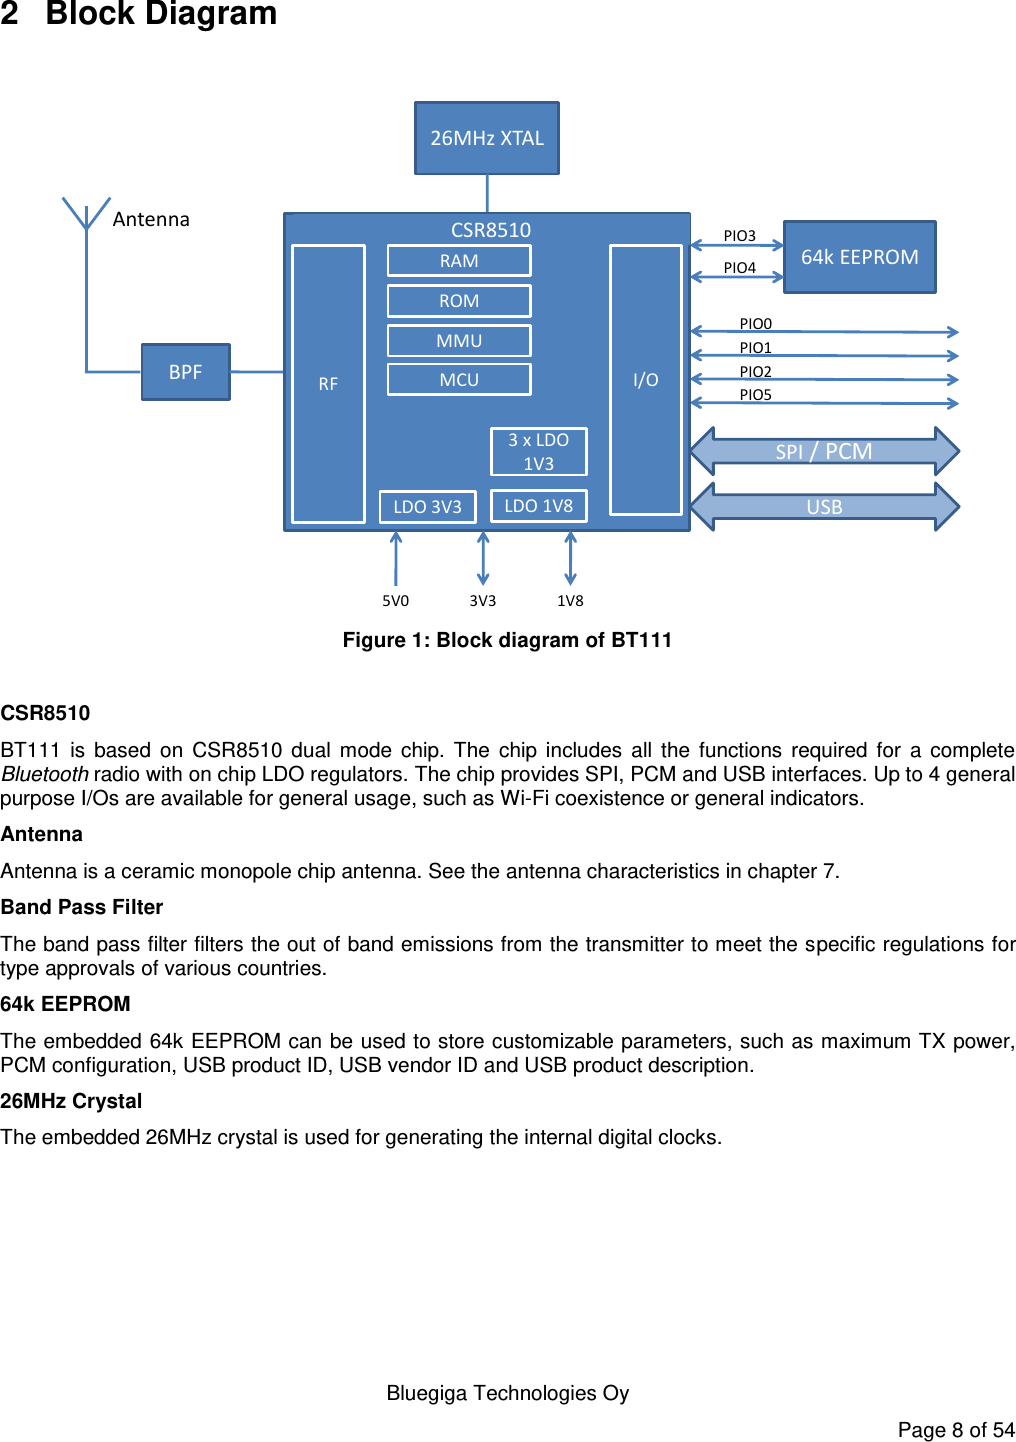    Bluegiga Technologies Oy Page 8 of 54 2  Block Diagram  64k EEPROMPIO3PIO426MHz XTALBPFAntennaPIO0PIO1PIO2PIO5SPI / PCMUSBCSR8510RFRAMROMMMUMCU I/OLDO 3V3 LDO 1V83 x LDO 1V35V0 3V3 1V8 Figure 1: Block diagram of BT111  CSR8510 BT111  is  based  on  CSR8510  dual  mode  chip.  The  chip  includes  all  the  functions  required  for  a  complete Bluetooth radio with on chip LDO regulators. The chip provides SPI, PCM and USB interfaces. Up to 4 general purpose I/Os are available for general usage, such as Wi-Fi coexistence or general indicators. Antenna Antenna is a ceramic monopole chip antenna. See the antenna characteristics in chapter 7. Band Pass Filter The band pass filter filters the out of band emissions from the transmitter to meet the specific regulations for type approvals of various countries. 64k EEPROM The embedded 64k EEPROM can be used to store customizable parameters, such as maximum TX power, PCM configuration, USB product ID, USB vendor ID and USB product description.   26MHz Crystal The embedded 26MHz crystal is used for generating the internal digital clocks. 